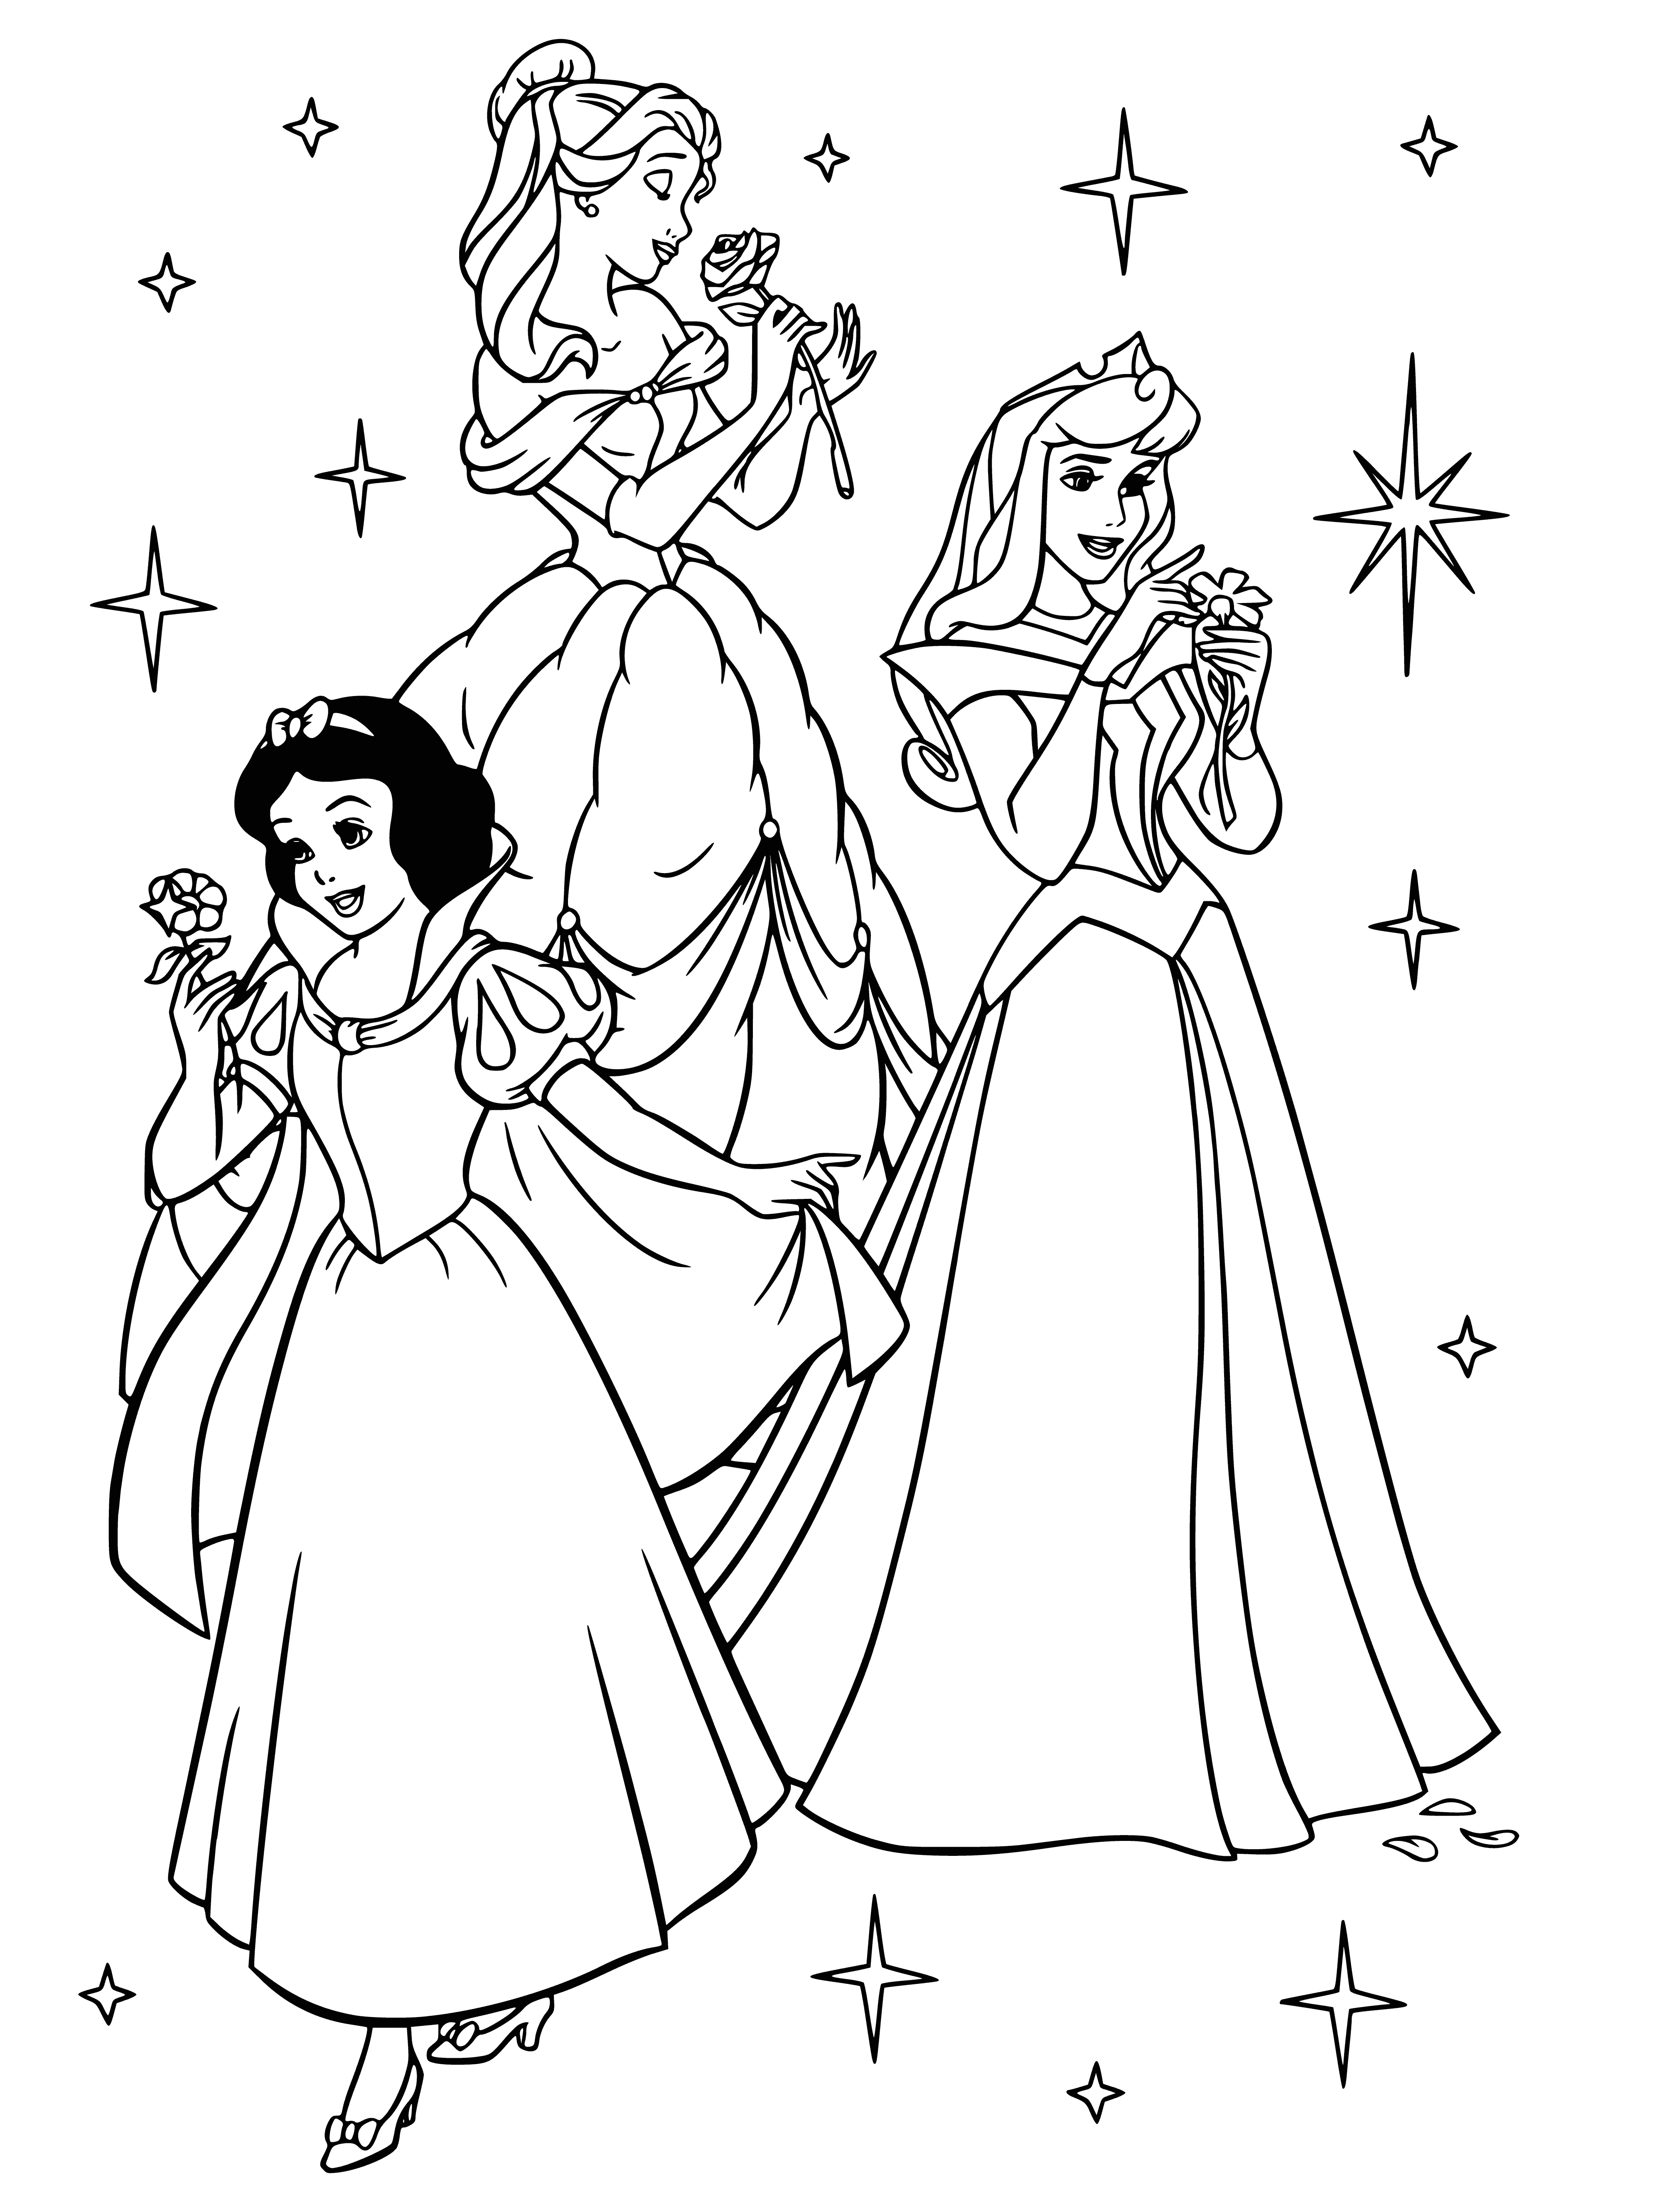 coloring page: Beautiful princesses Snow White, Belle, and Aurora stand in magical settings with captivating expressions.